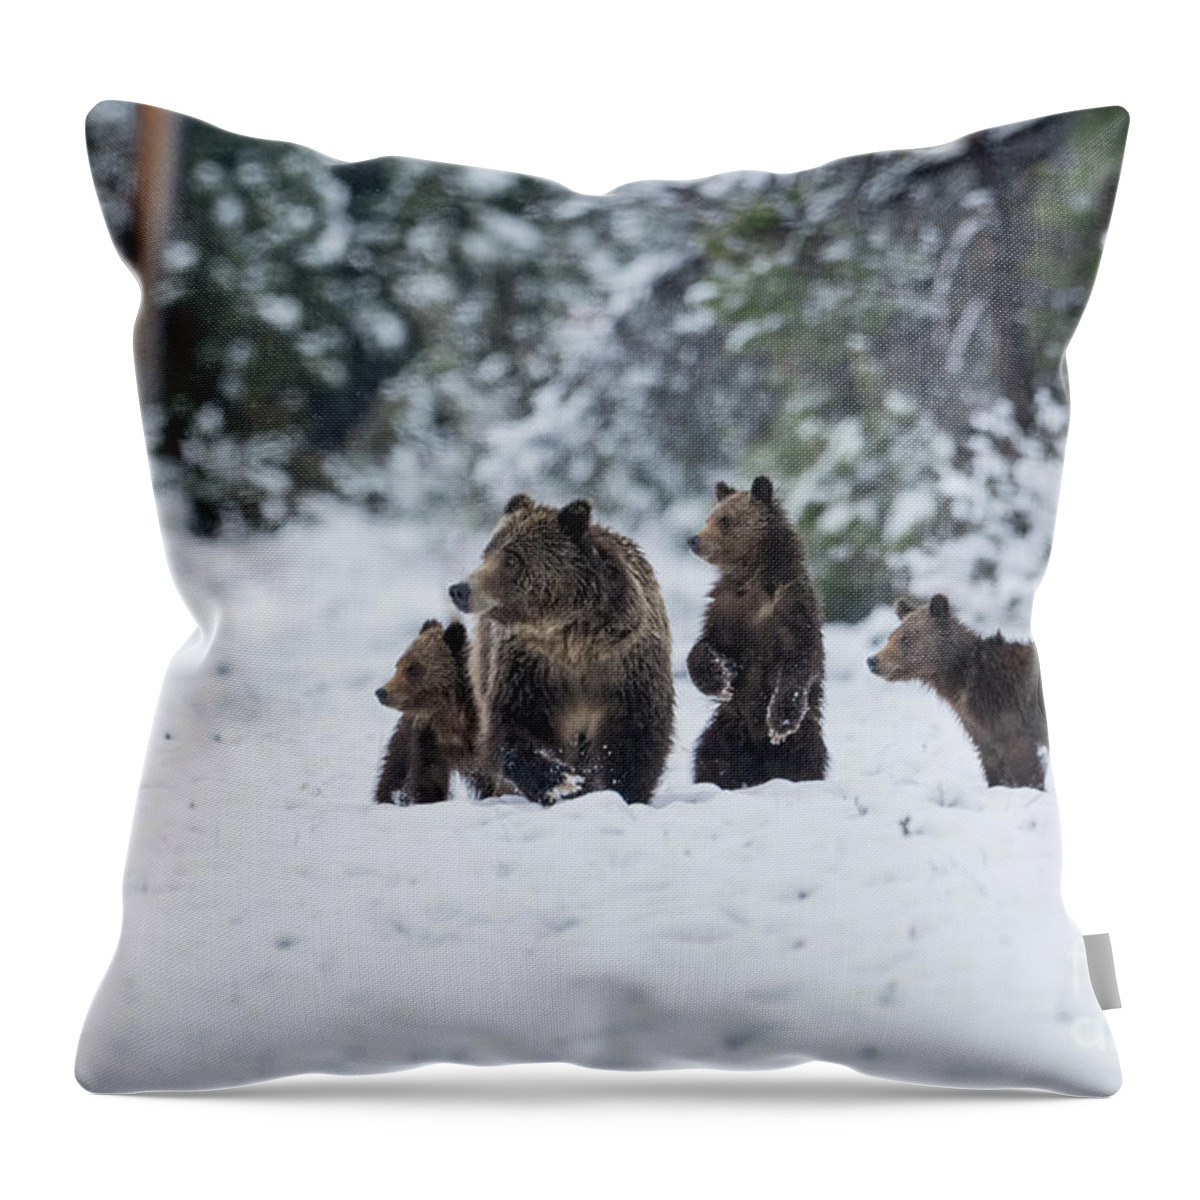 Animals Throw Pillow featuring the photograph Spring Folly - Bears by Sandra Bronstein